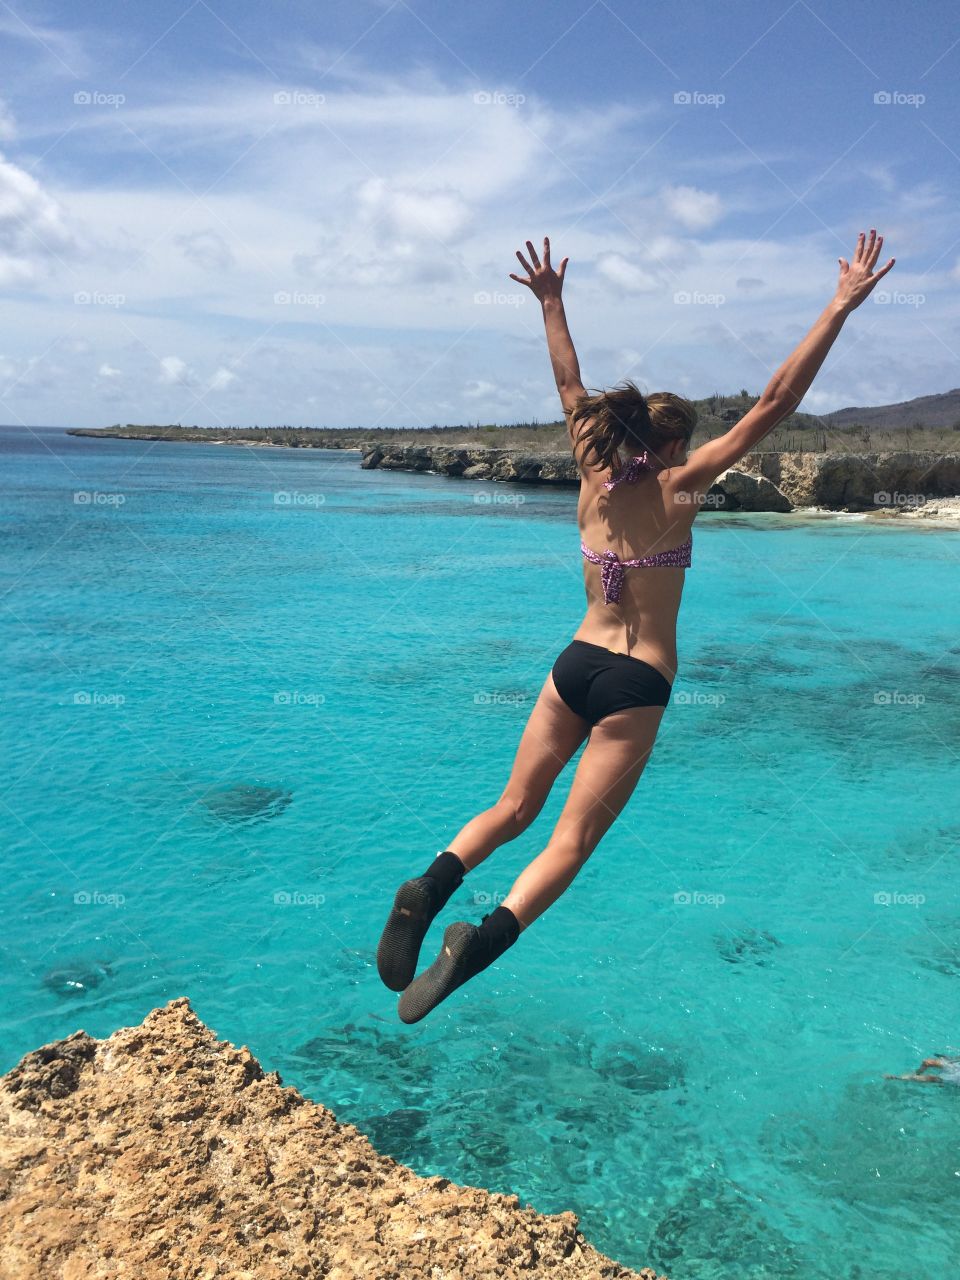 Geronimo! Jumping off a cliff into the beautiful, crystal clear water of Bonaire. 